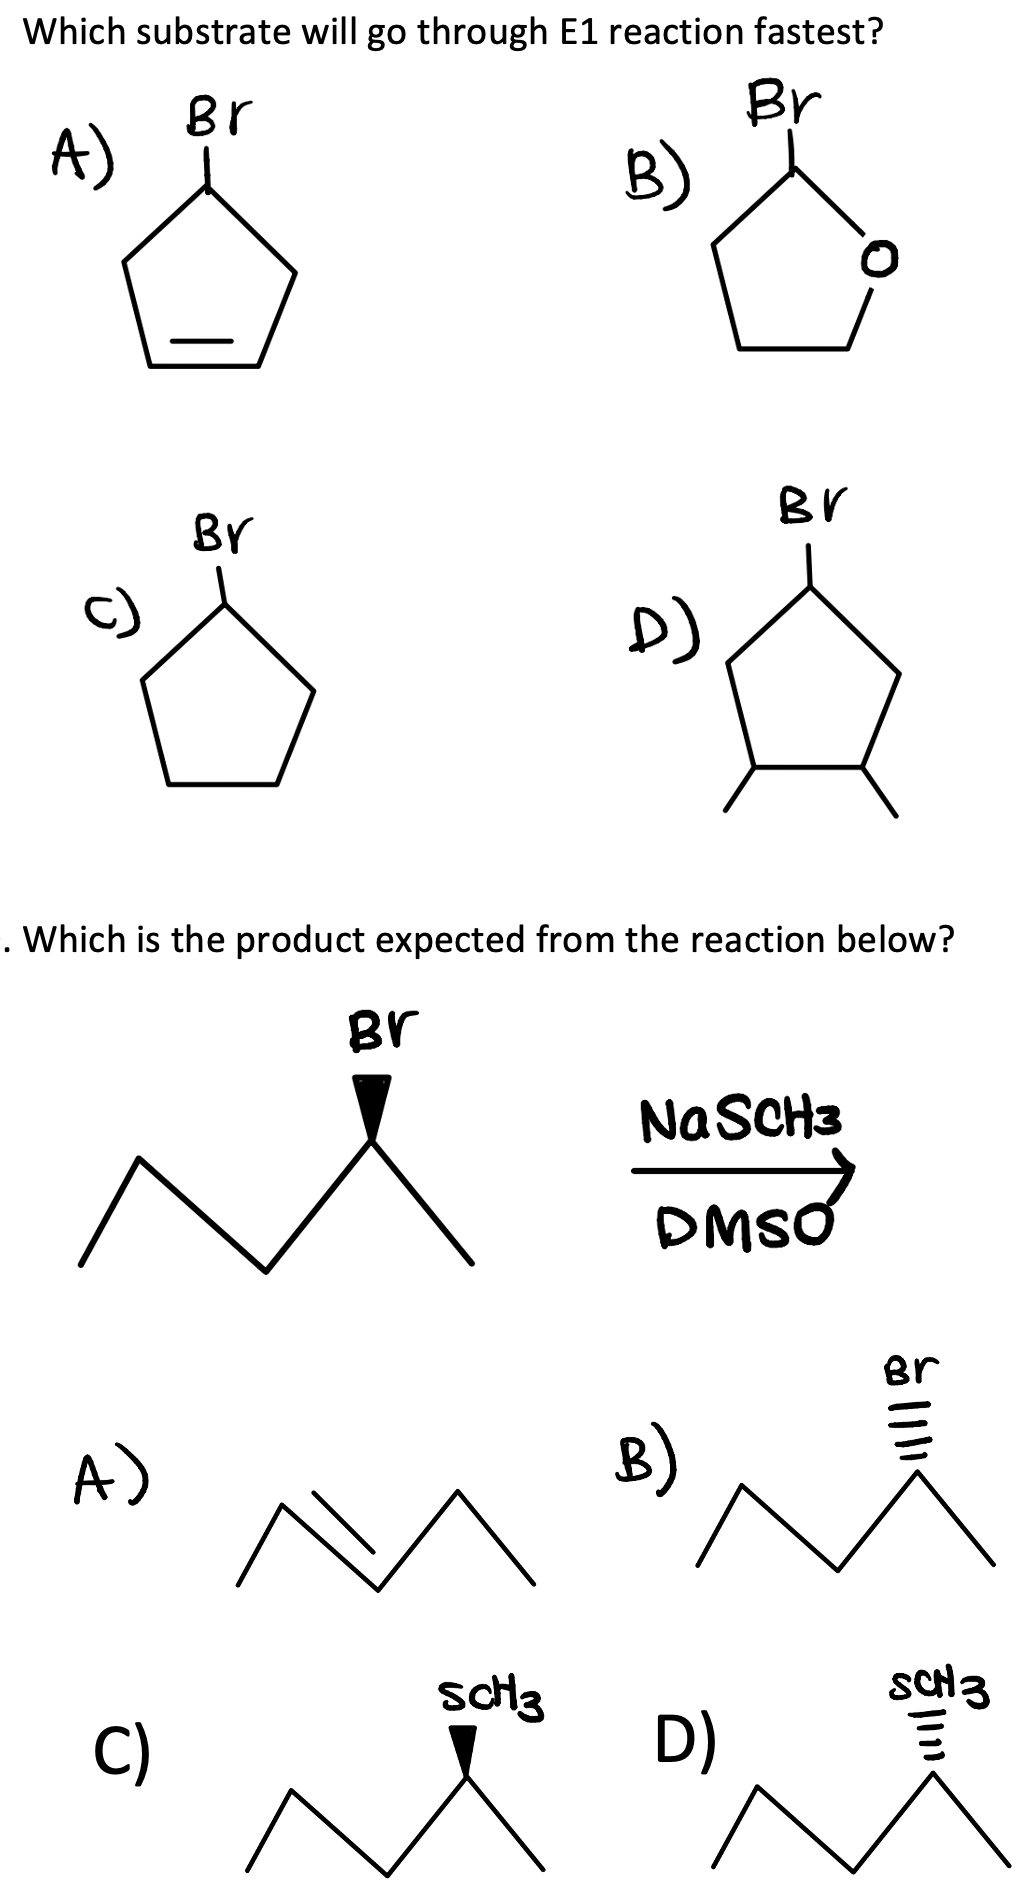 Which substrate will go through E1 reaction fastest?
Br
Br
A)
B)
BY
D)
. Which is the product expected from the reaction below?
Br
Na SCH3
DMSO
A)
C)
ScH3
B)
D)
BV
O
111190
Br
SCH 3
||||?